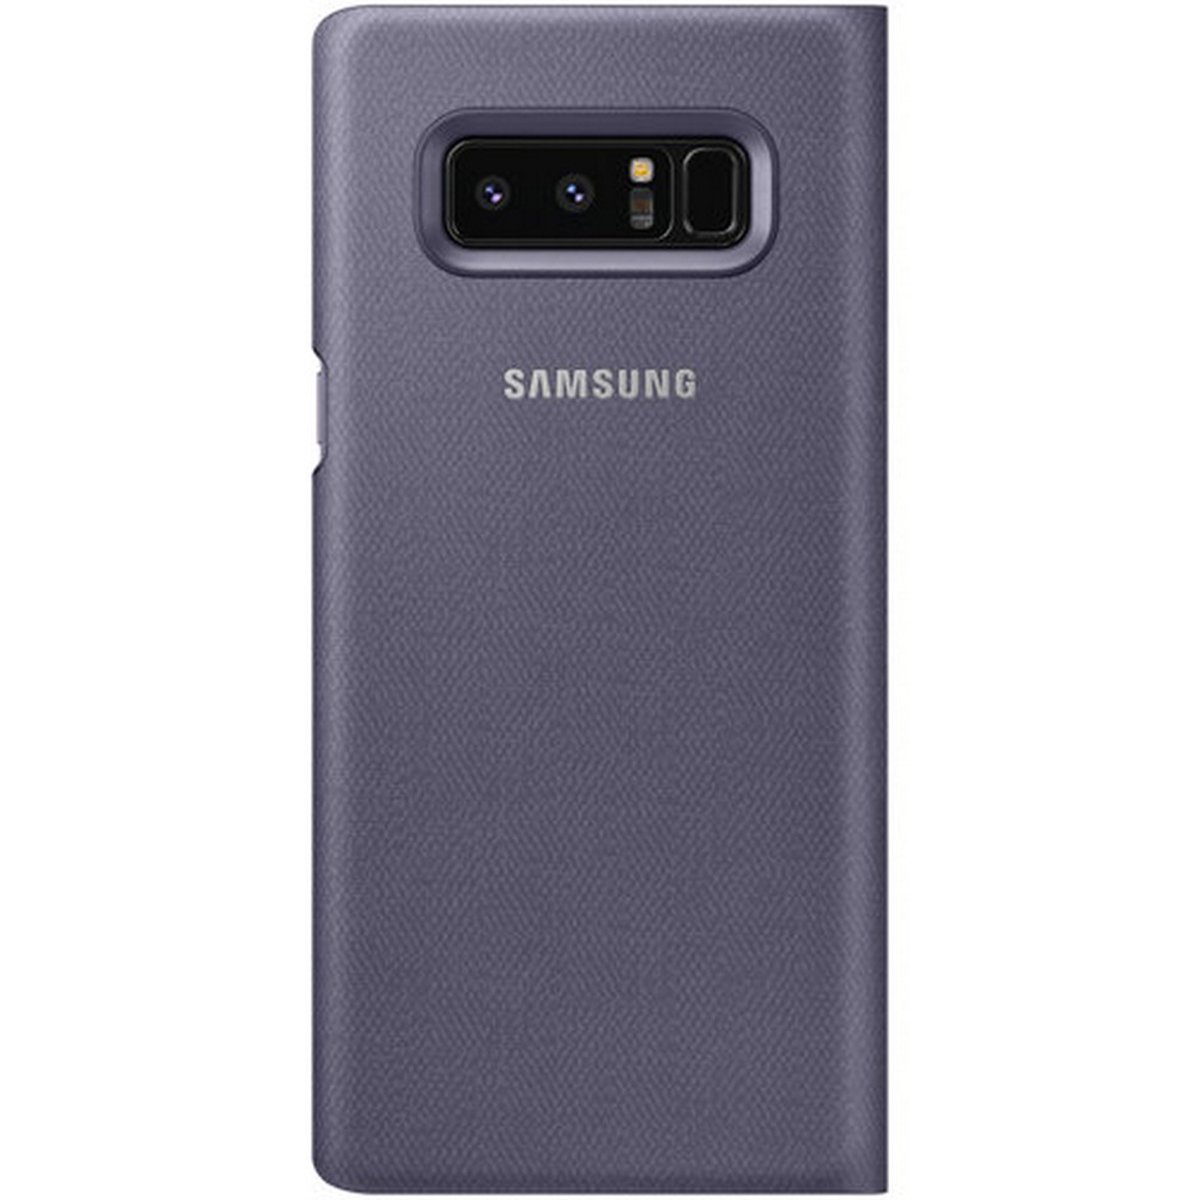 Galaxy Note8 LED View Cover NN950 Violet